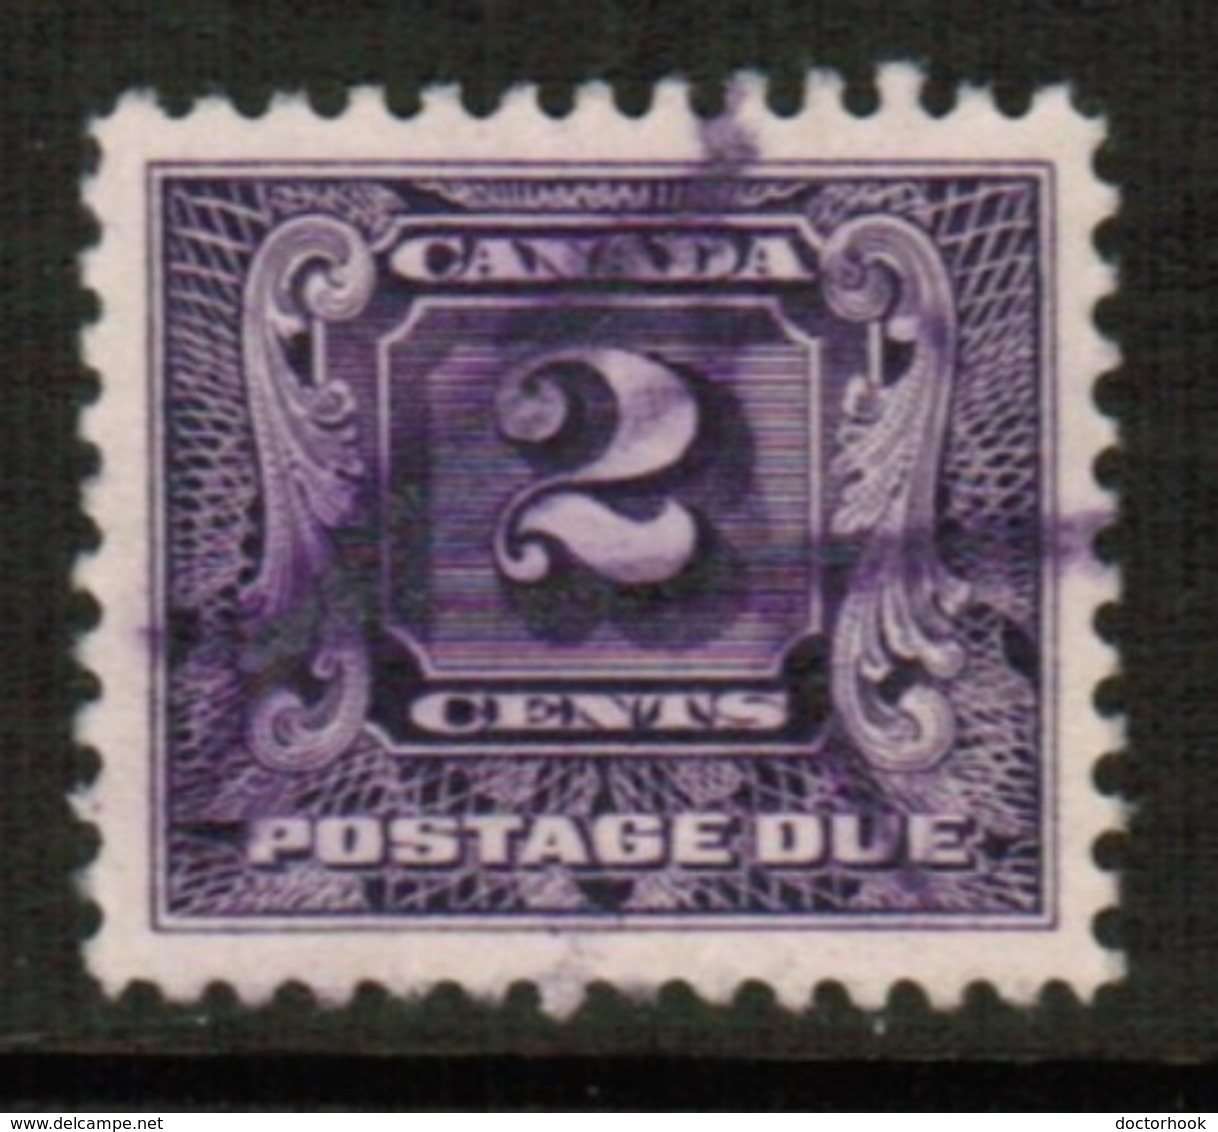 CANADA  Scott # J 2 VF USED (Stamp Scan # 548) - Postage Due